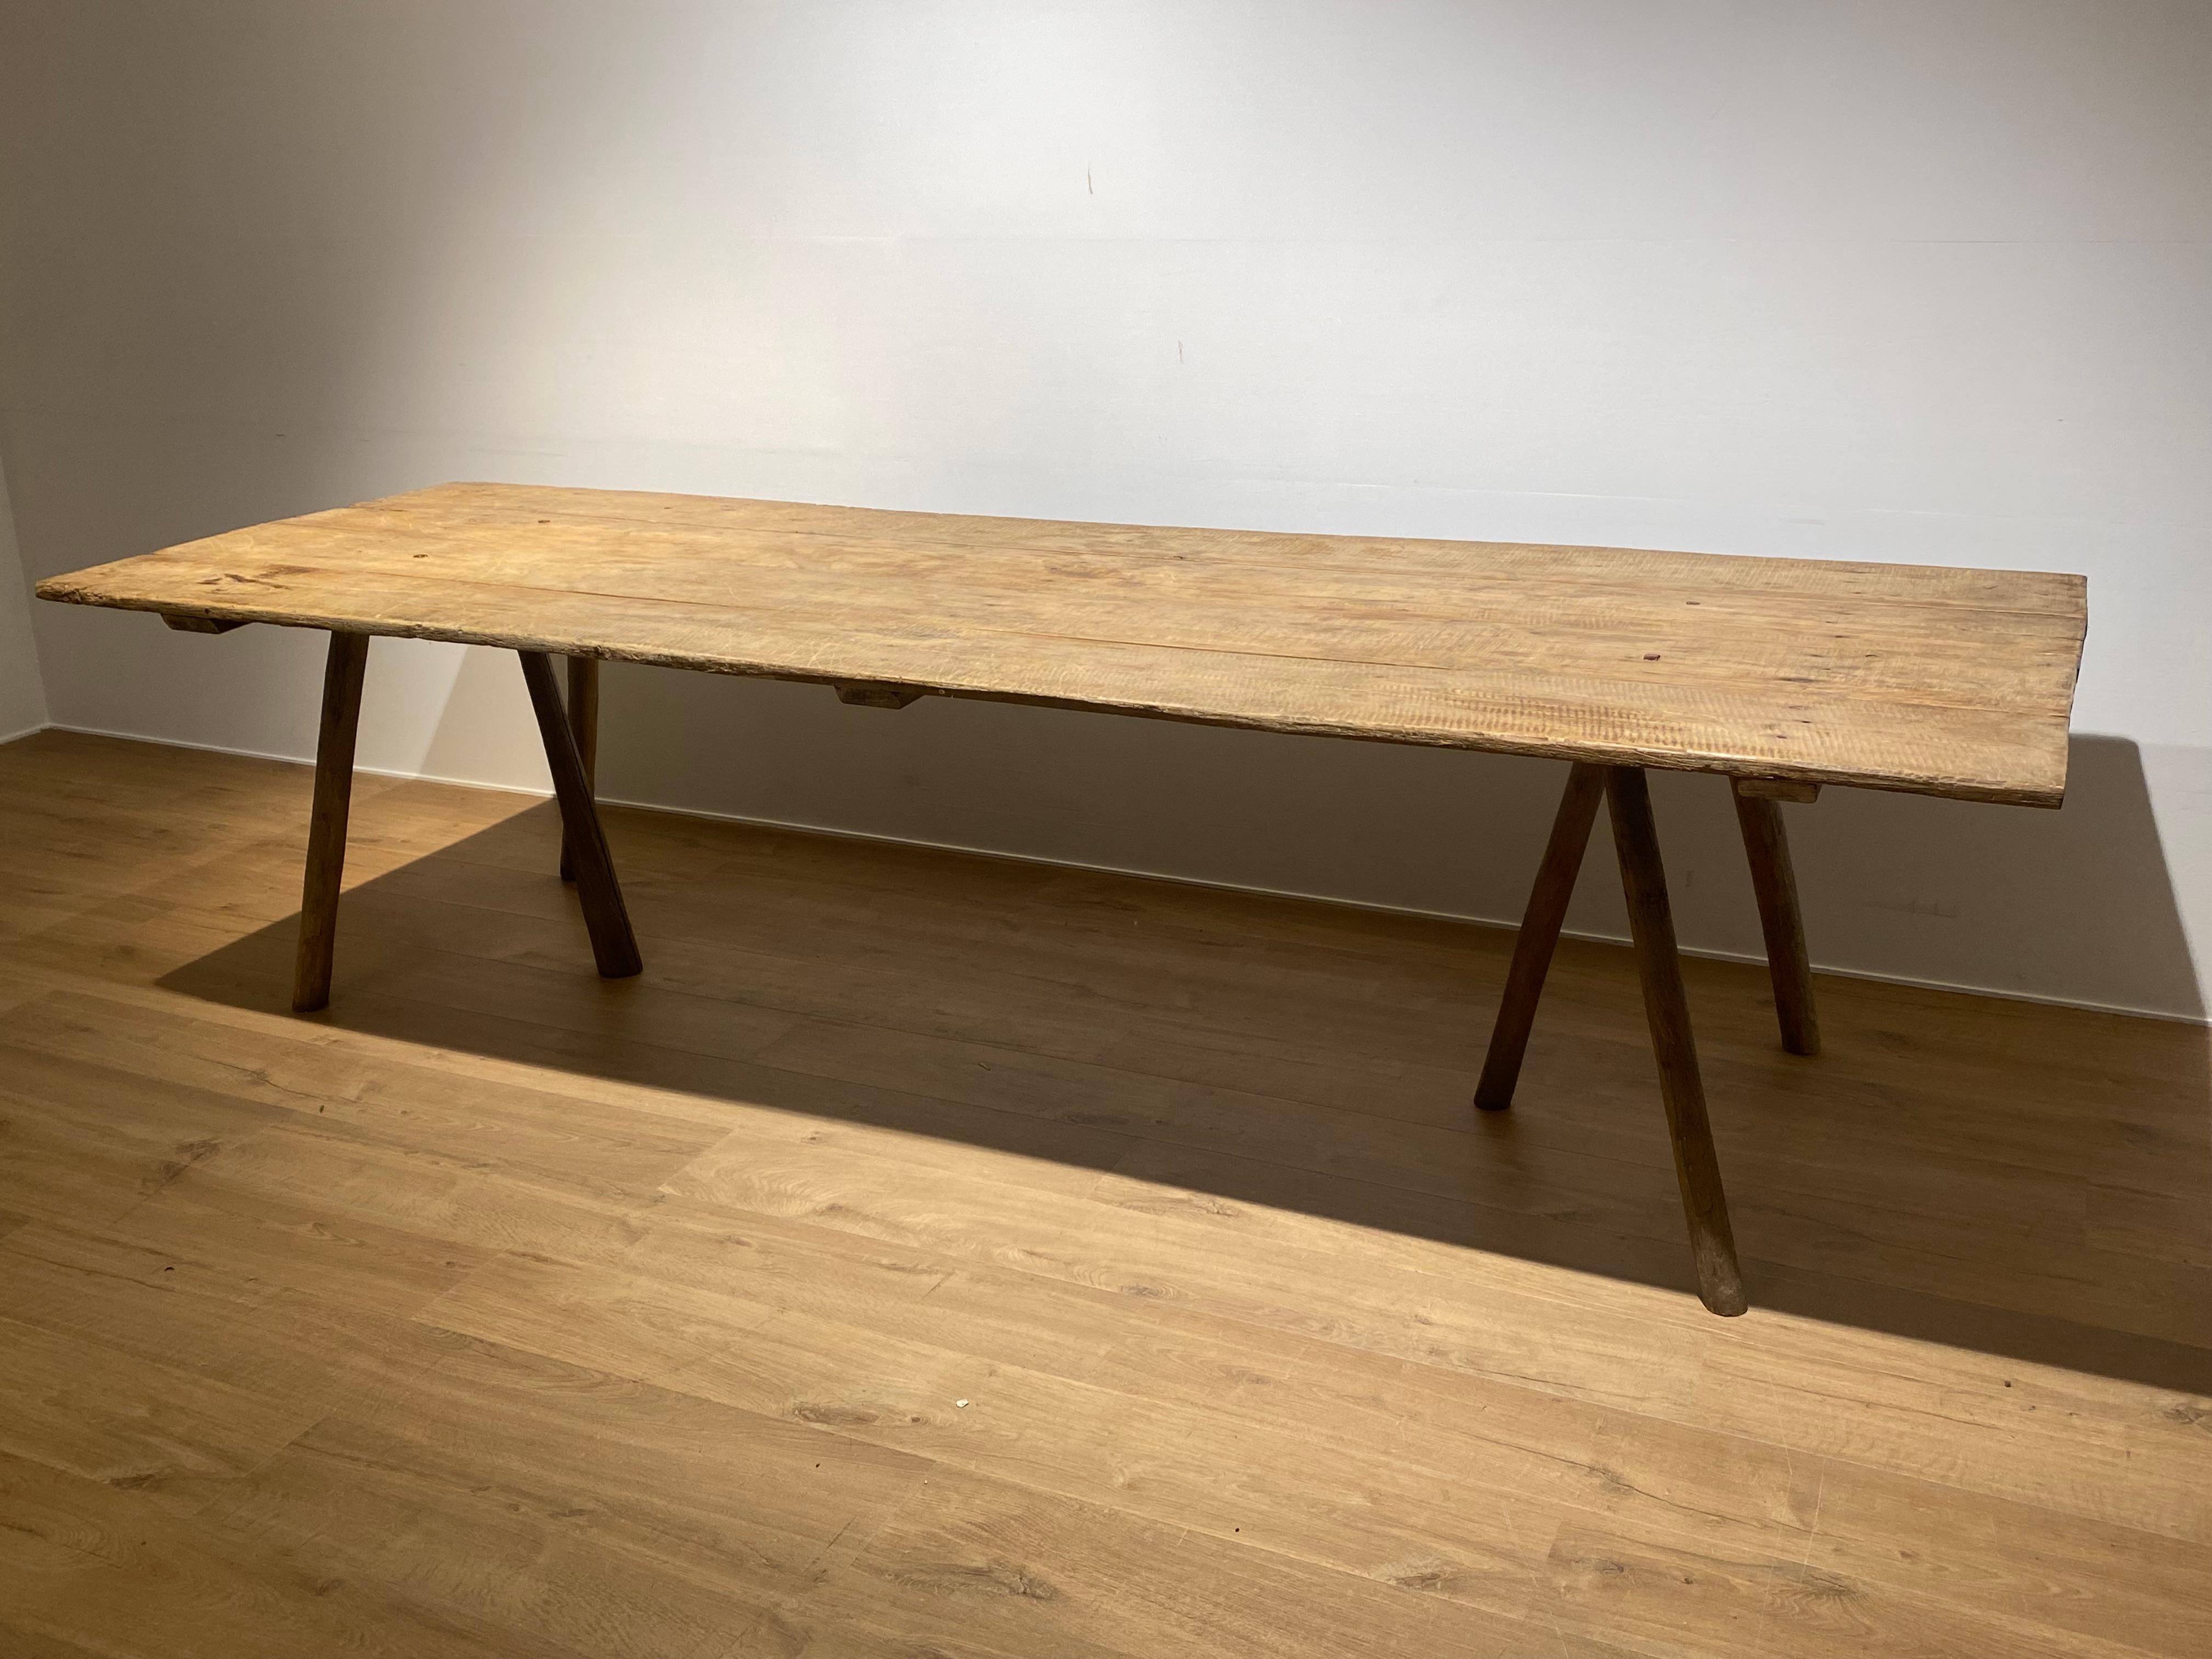 French Vigneron Table in a Bleached Wood In Excellent Condition For Sale In Schellebelle, BE